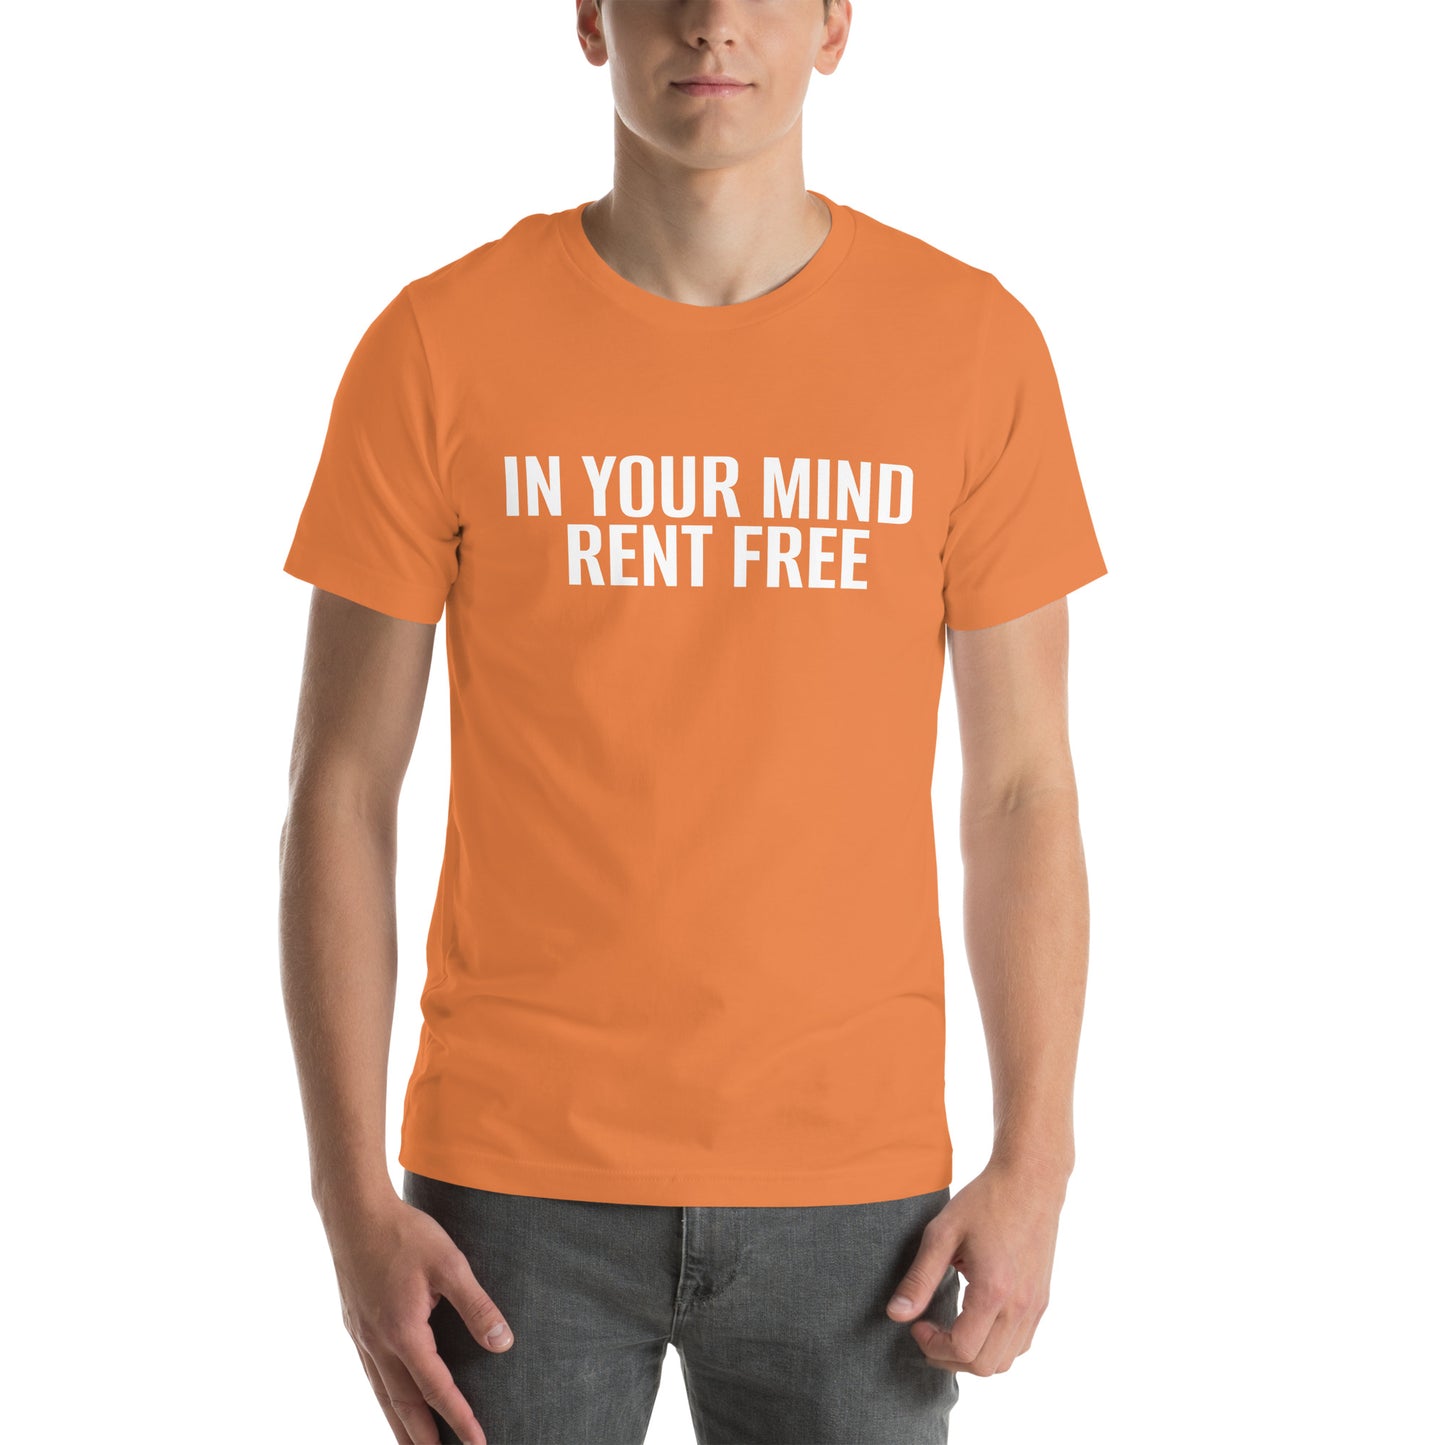 IN YOUR MIND RENT FREE  Unisex t-shirt